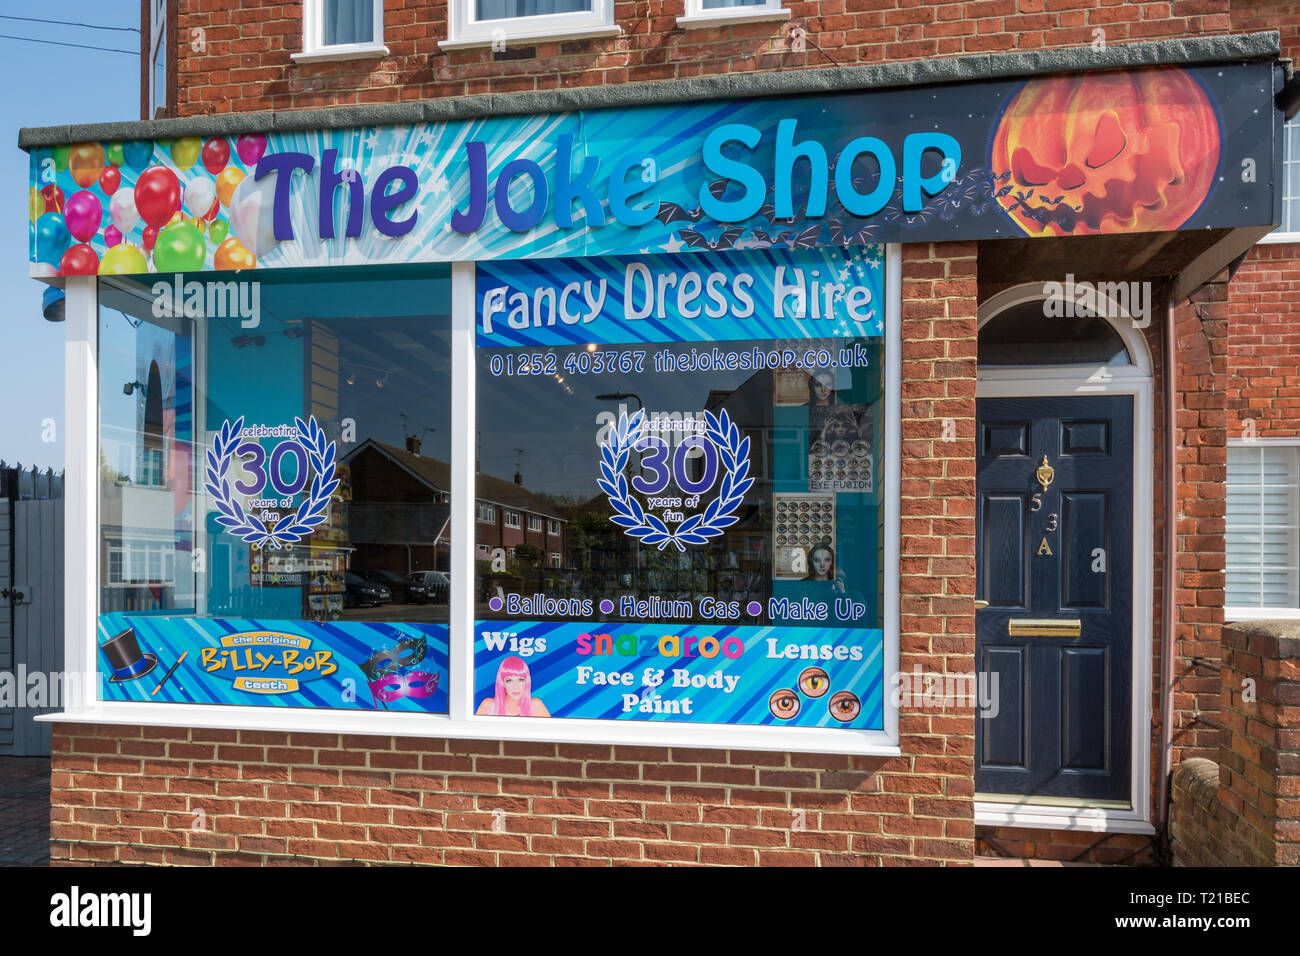 Colourful decorated shop front of The Joke Shop in Farnborough, Hampshire, UK Stock Photo